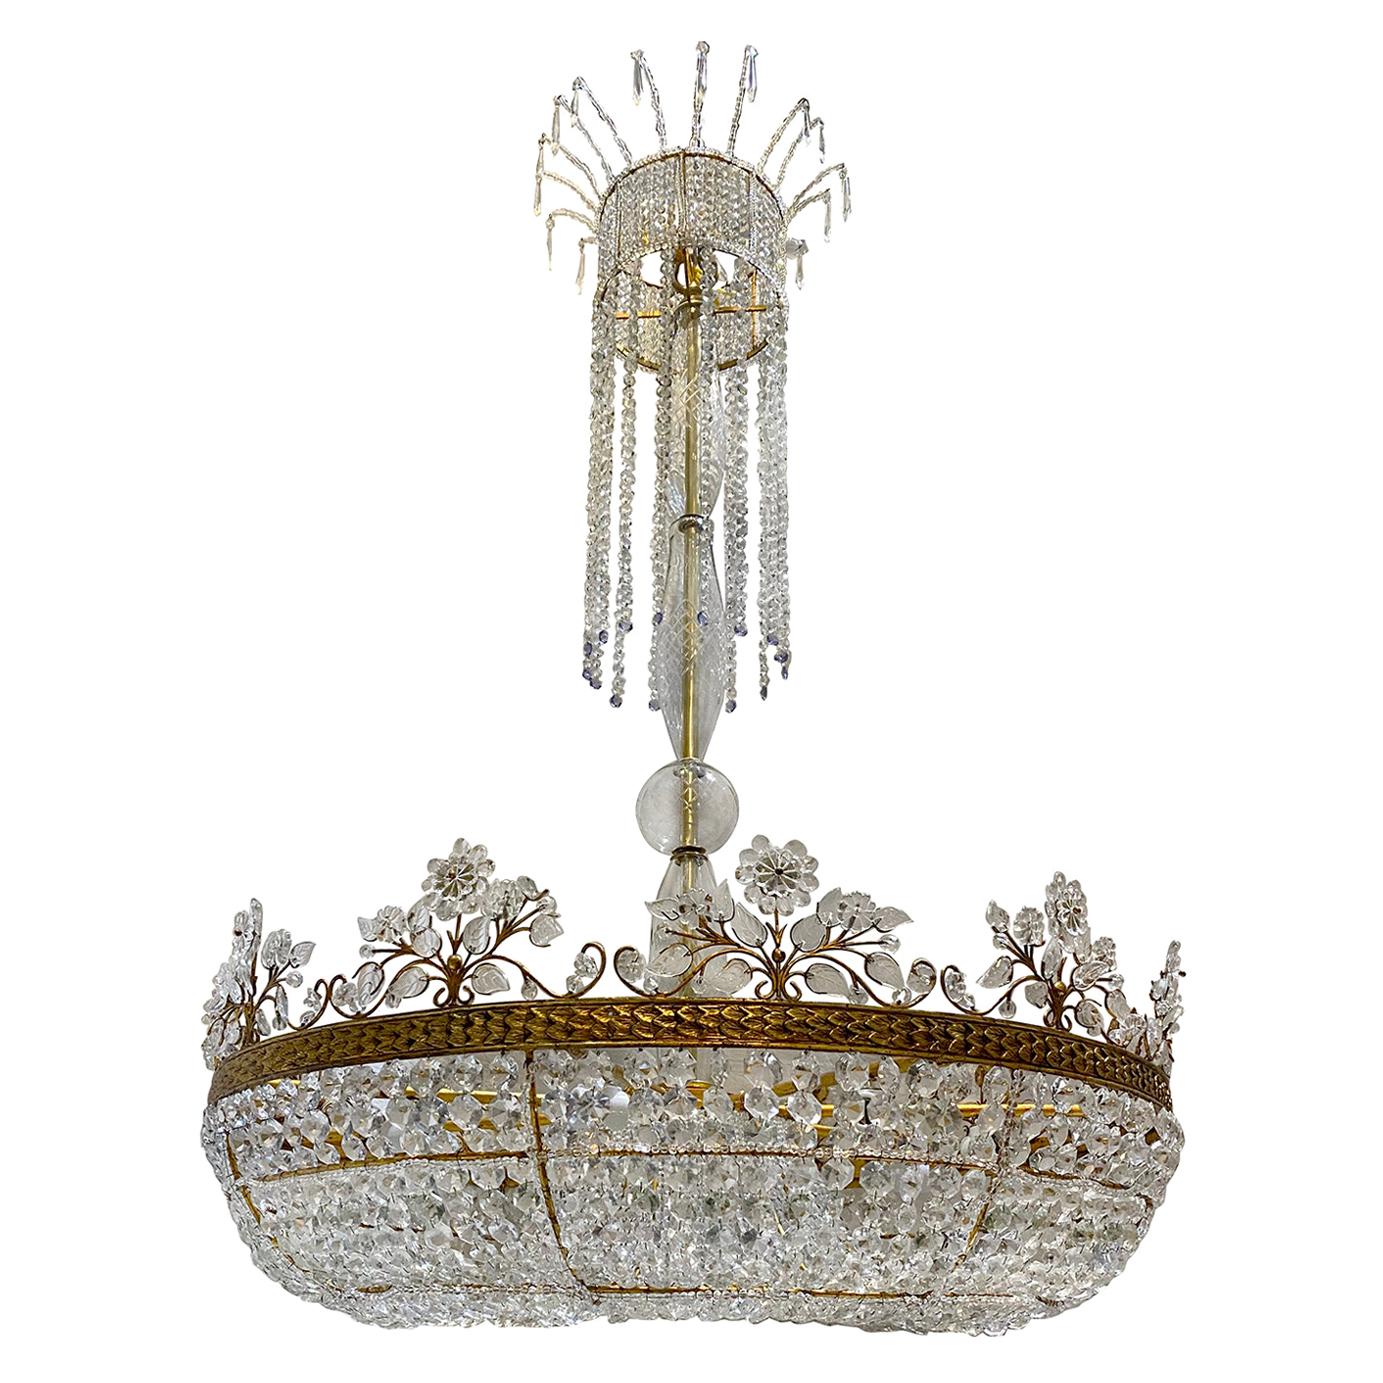 Grand-Scale Gilt Metal and Crystals Chandelier with Glass Leaves and Flowers